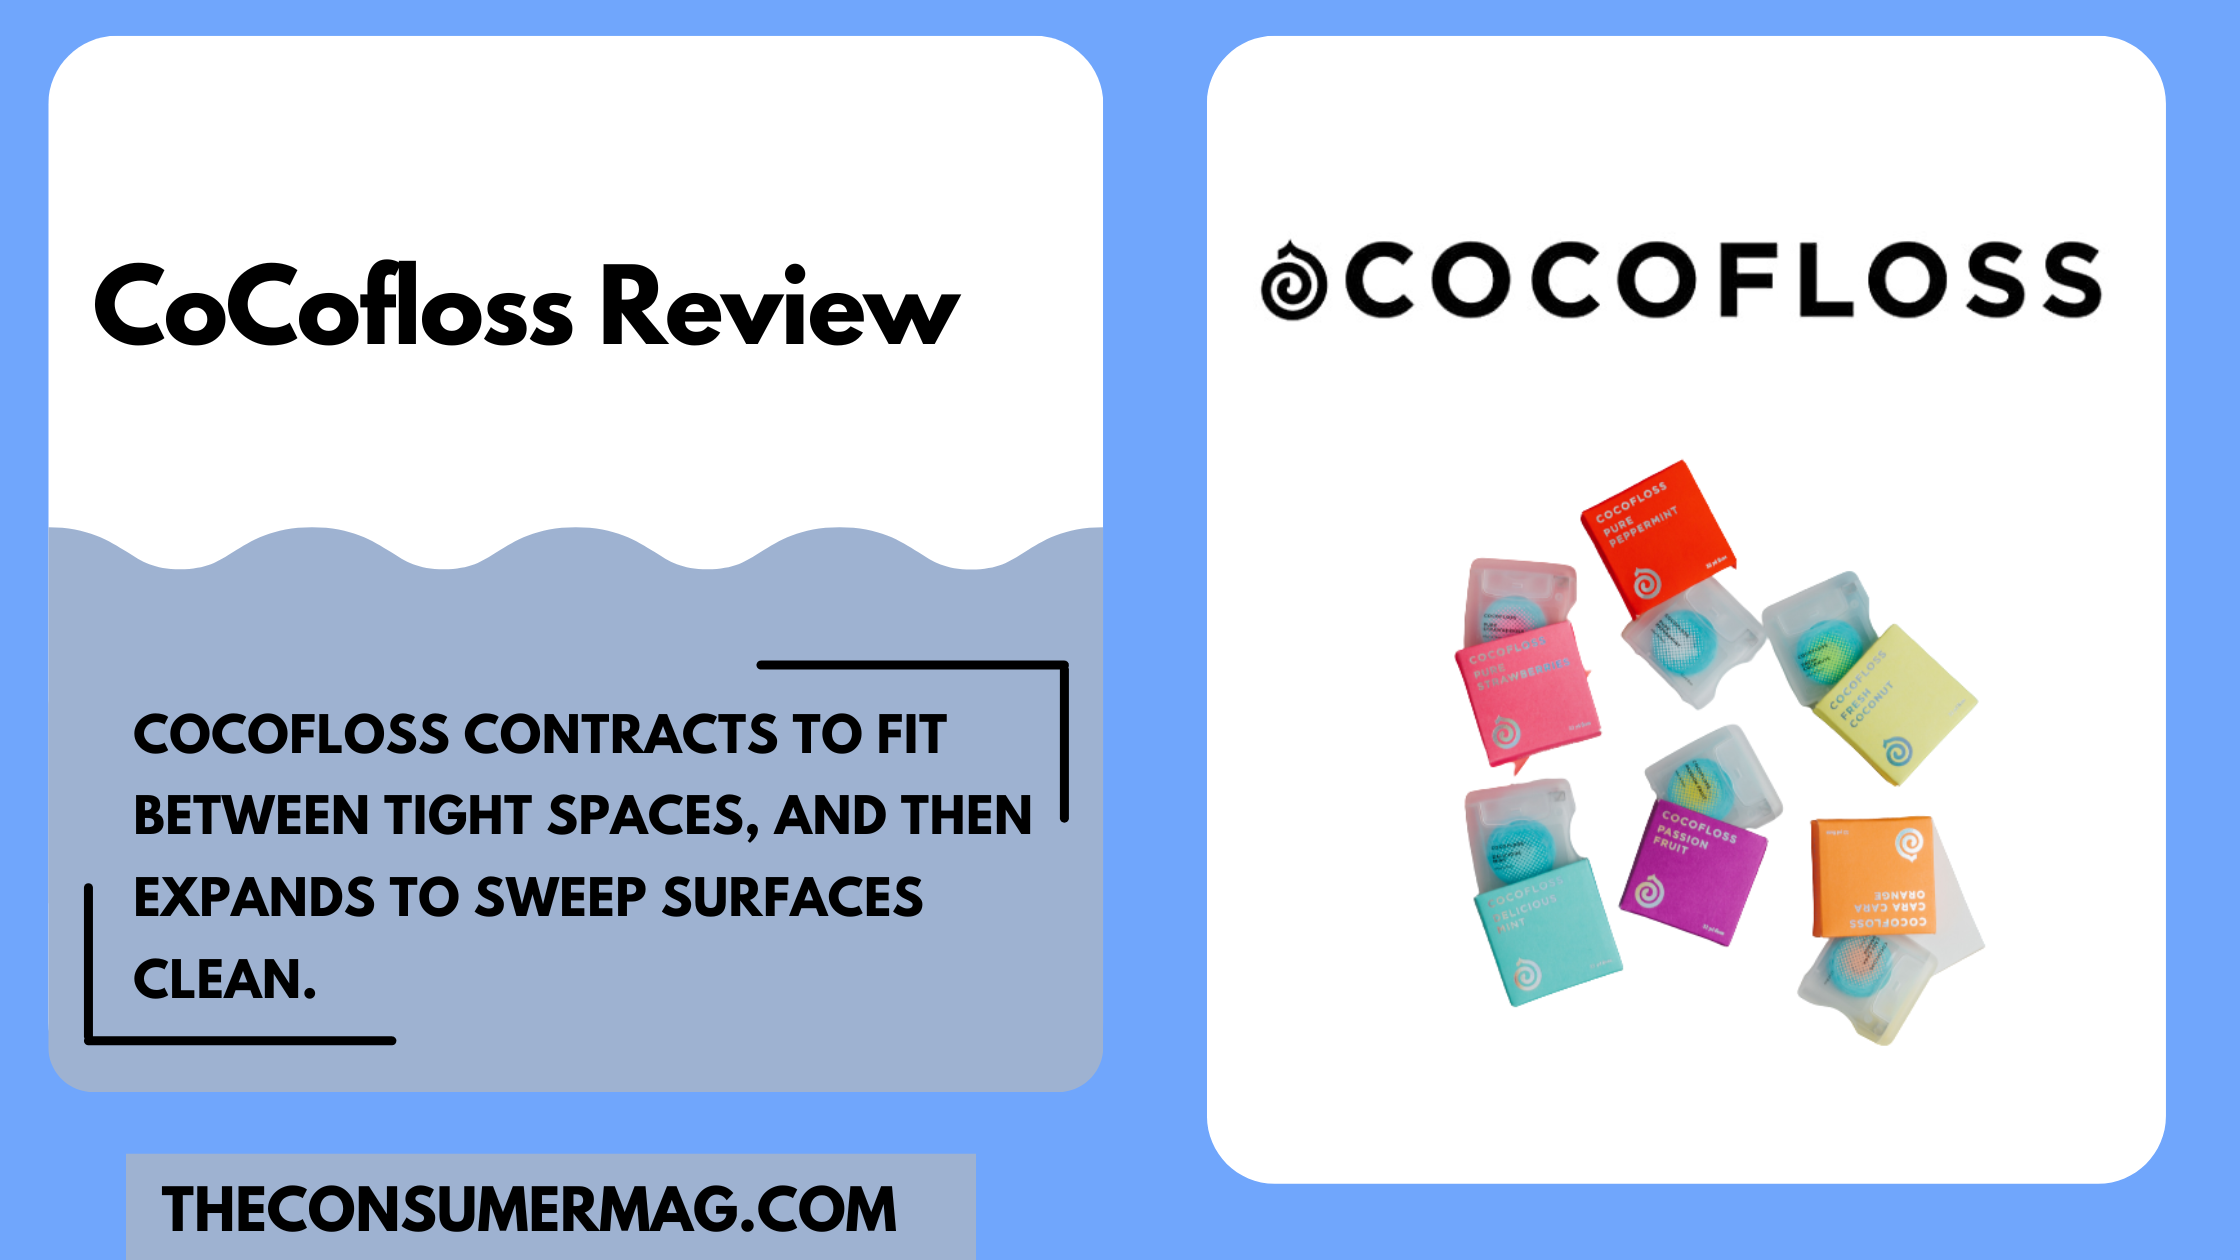 Cocofloss featured image